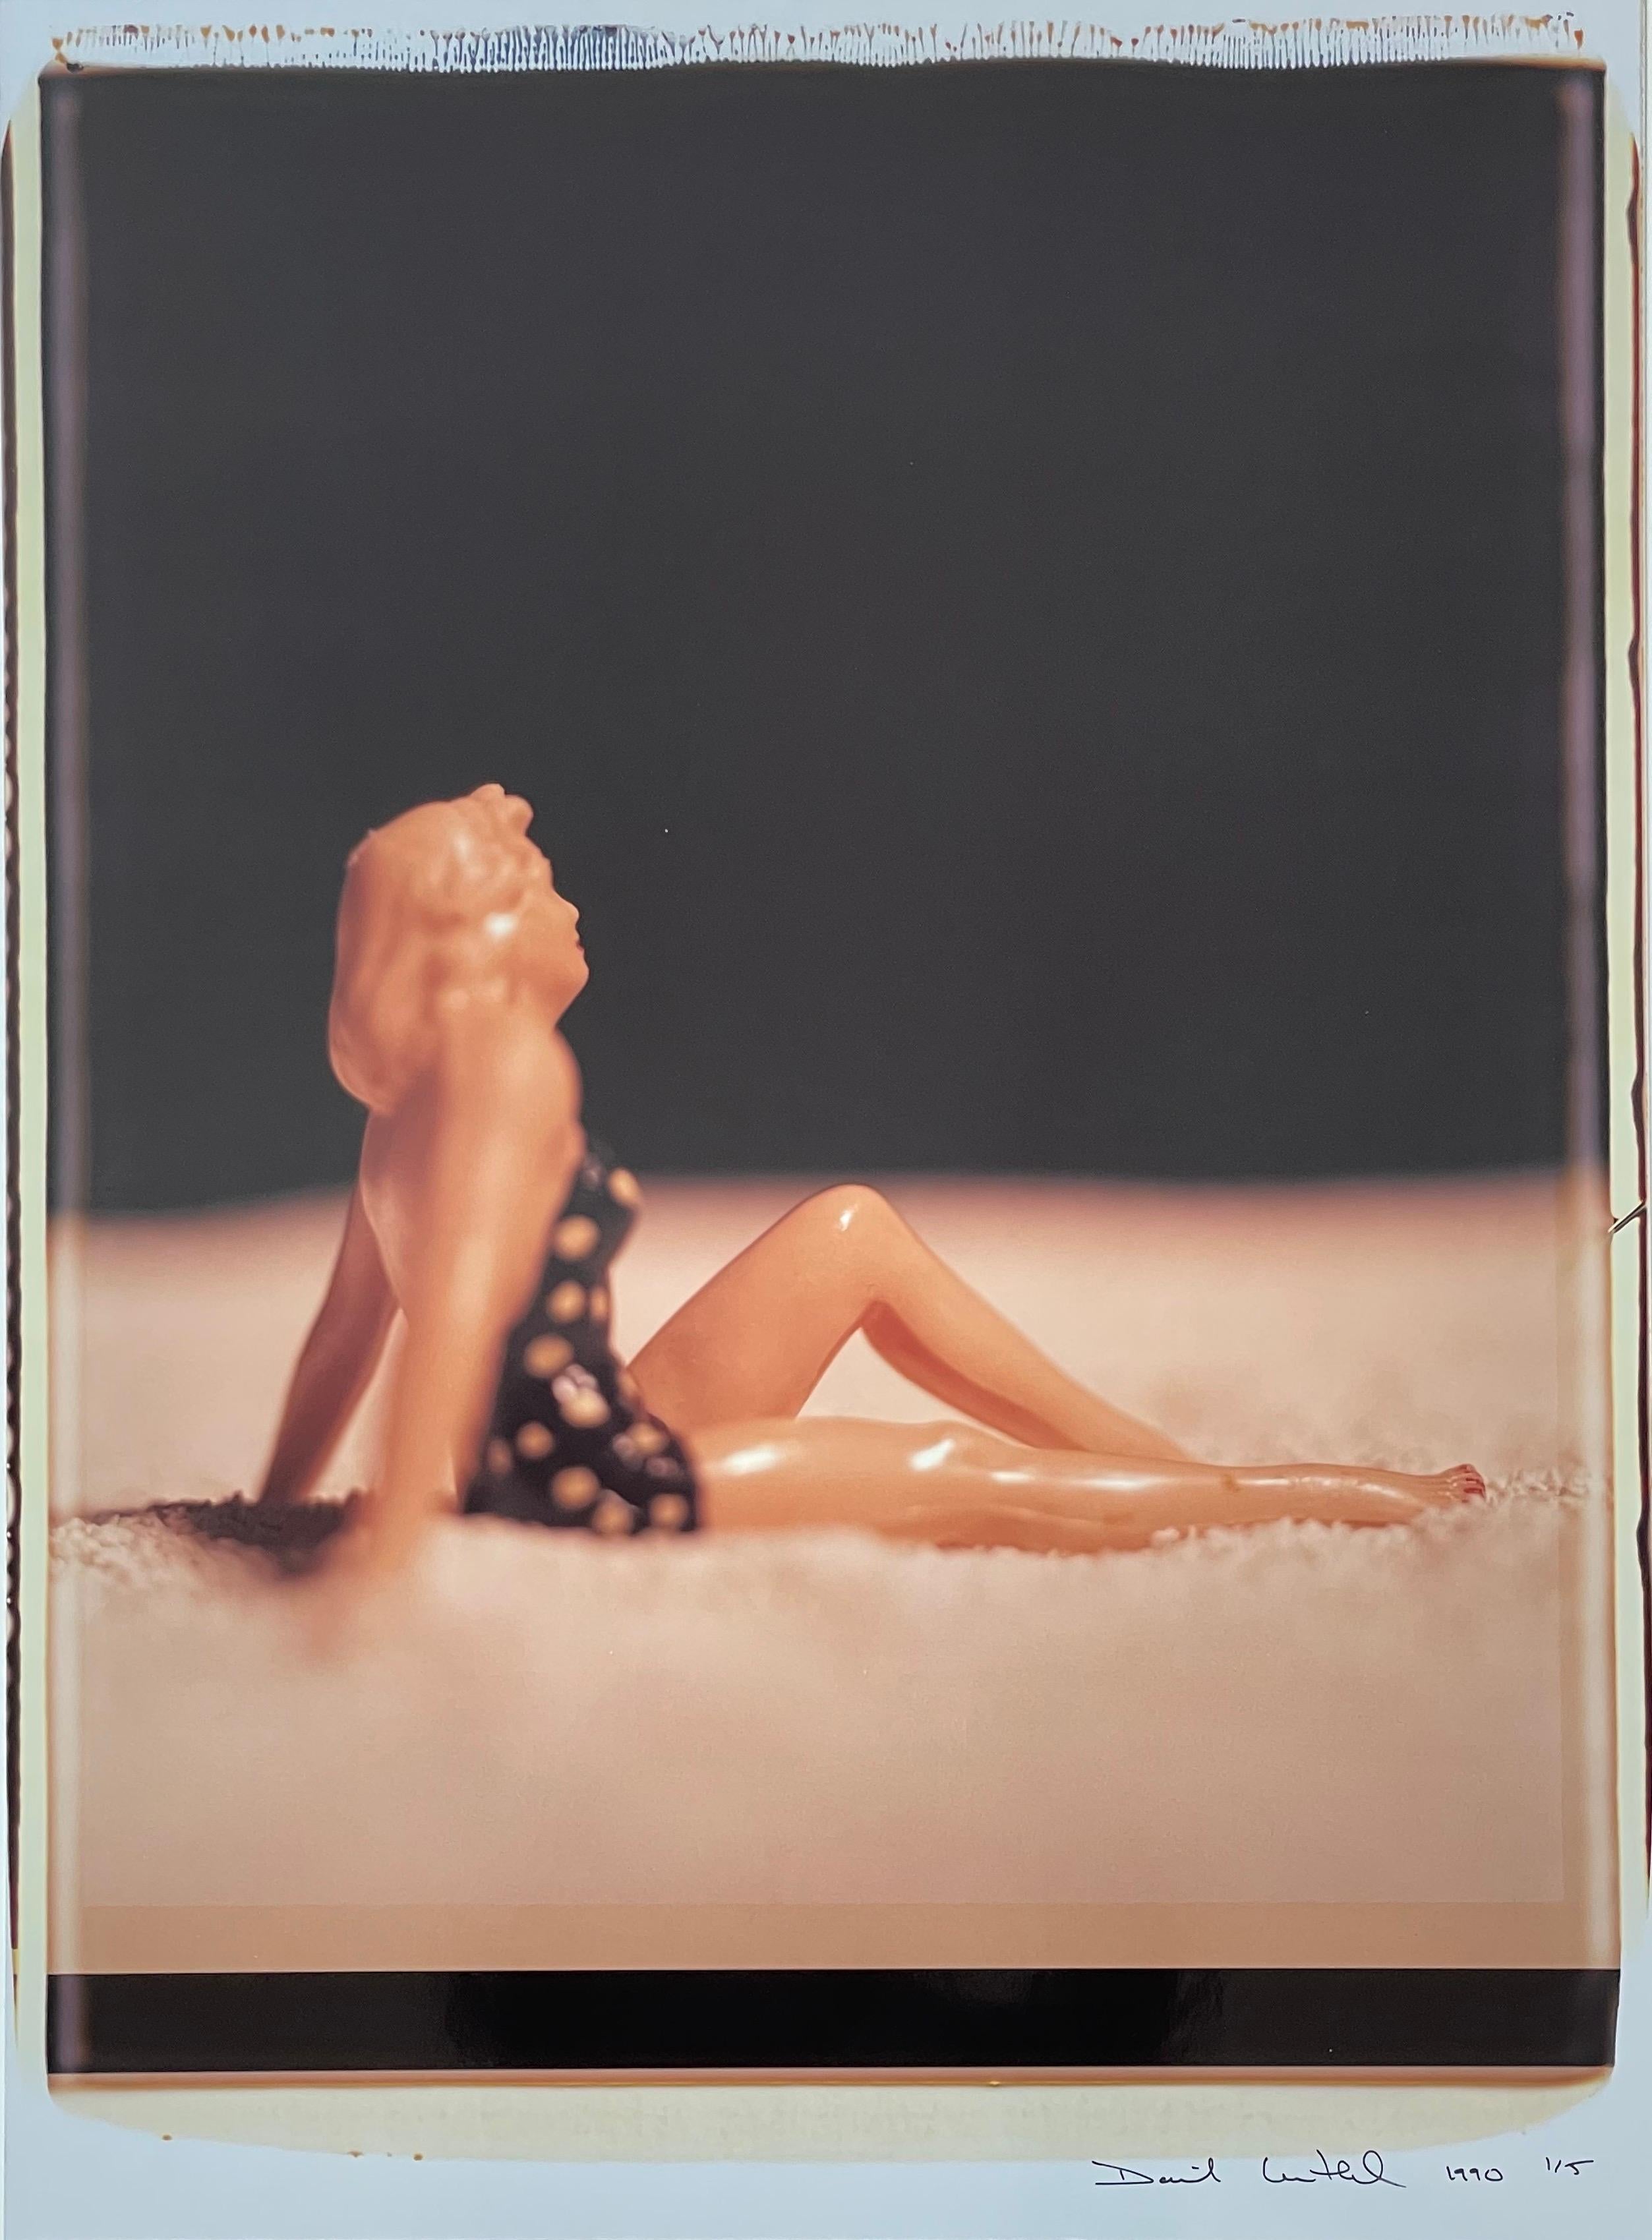 David Levinthal Color Photograph - Untitled from America Beauties (Sun Bather, AB 16)